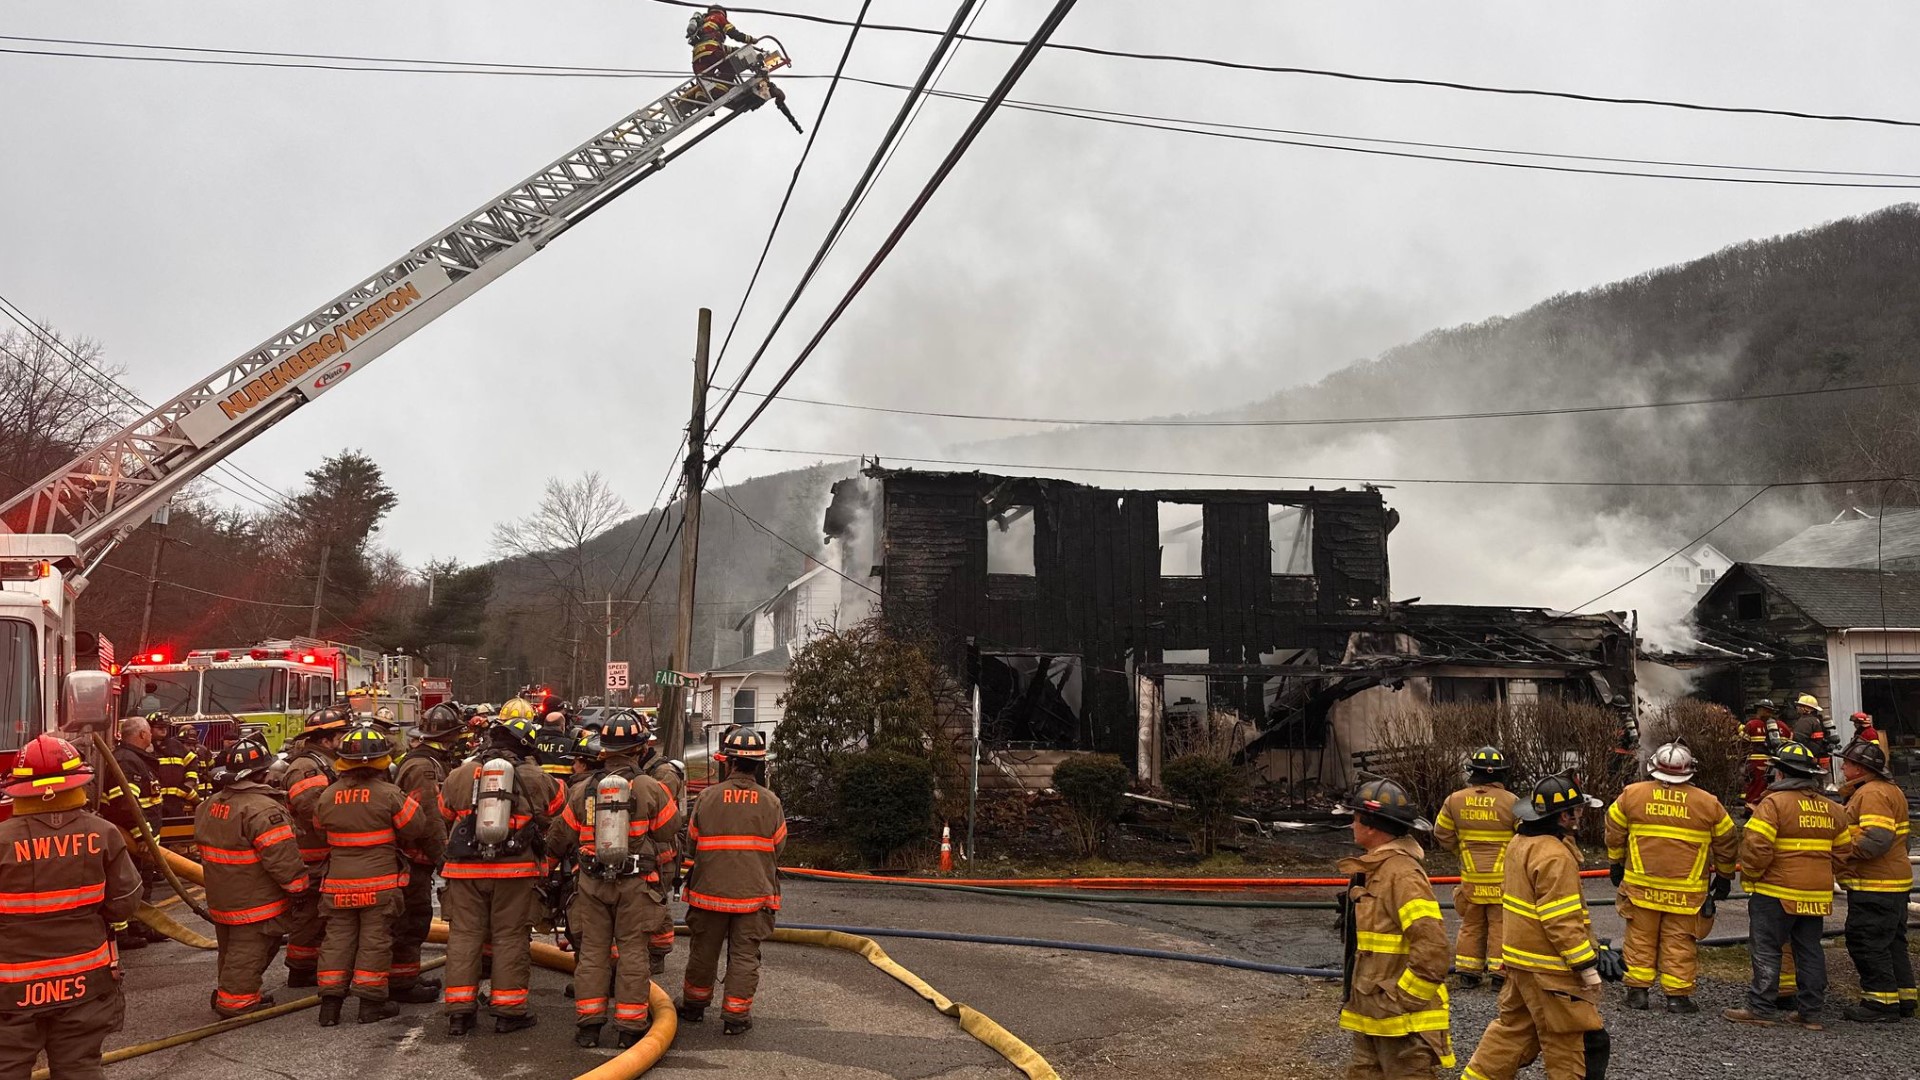 Two fires took place, one in western Pennsylvania killing at least five people. Another fire taking place just outside Philadelphia had no reported injuries.